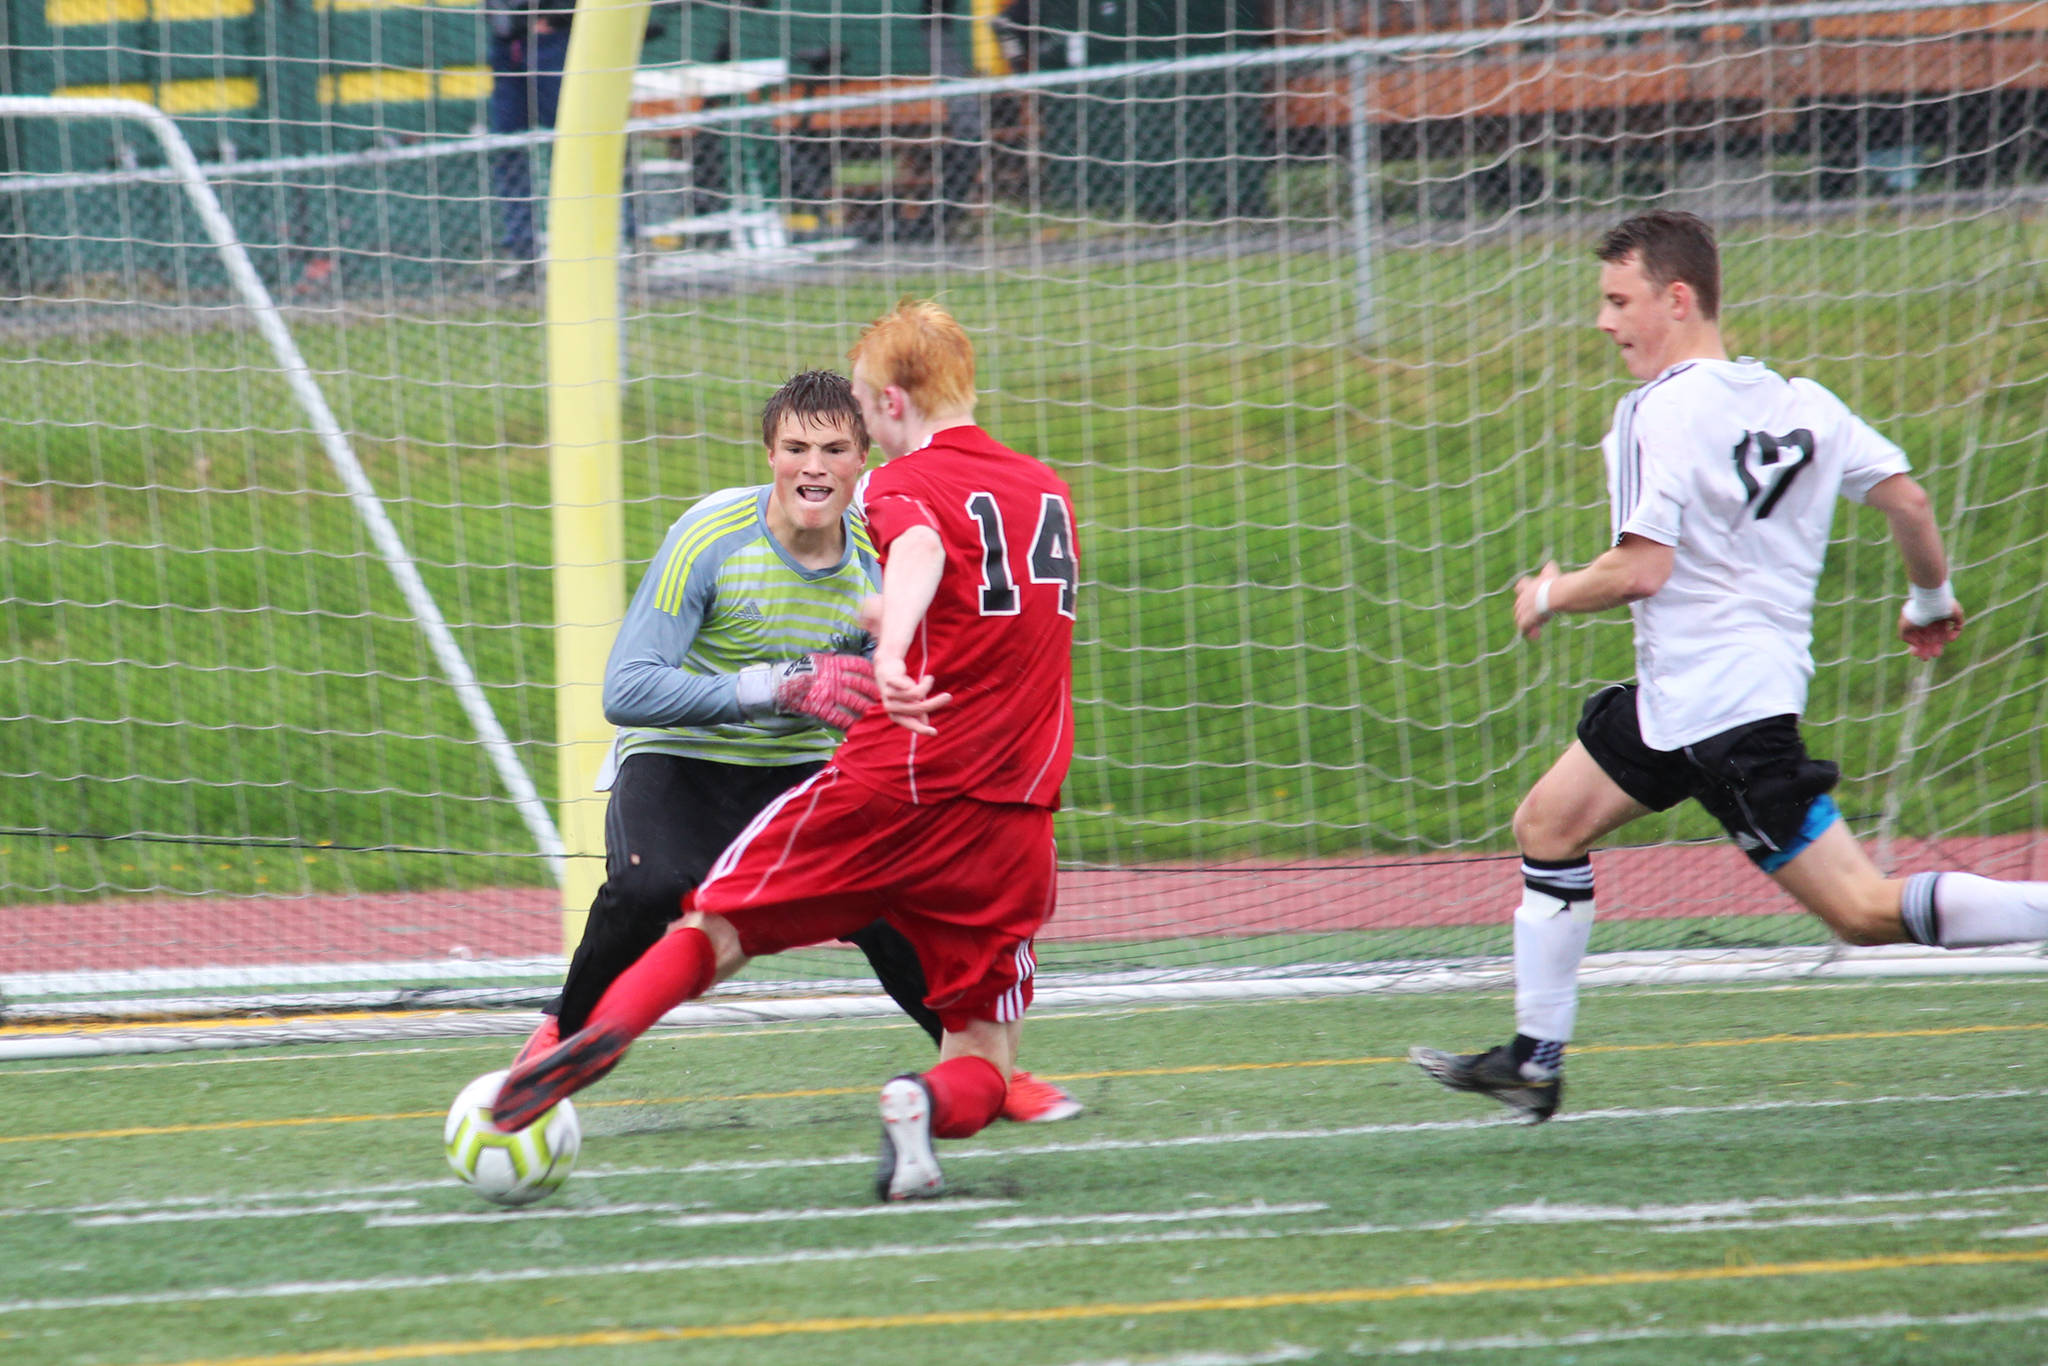 Kenai goalkeeper Braedon Pitsch prepares for a shot from Juneau’s Kannon Goetz during the final game of the Division II state soccer championship tournament Saturday, May 25, 2019 at Service High School in Anchorage, Alaska. (Photo by Megan Pacer/Homer News)